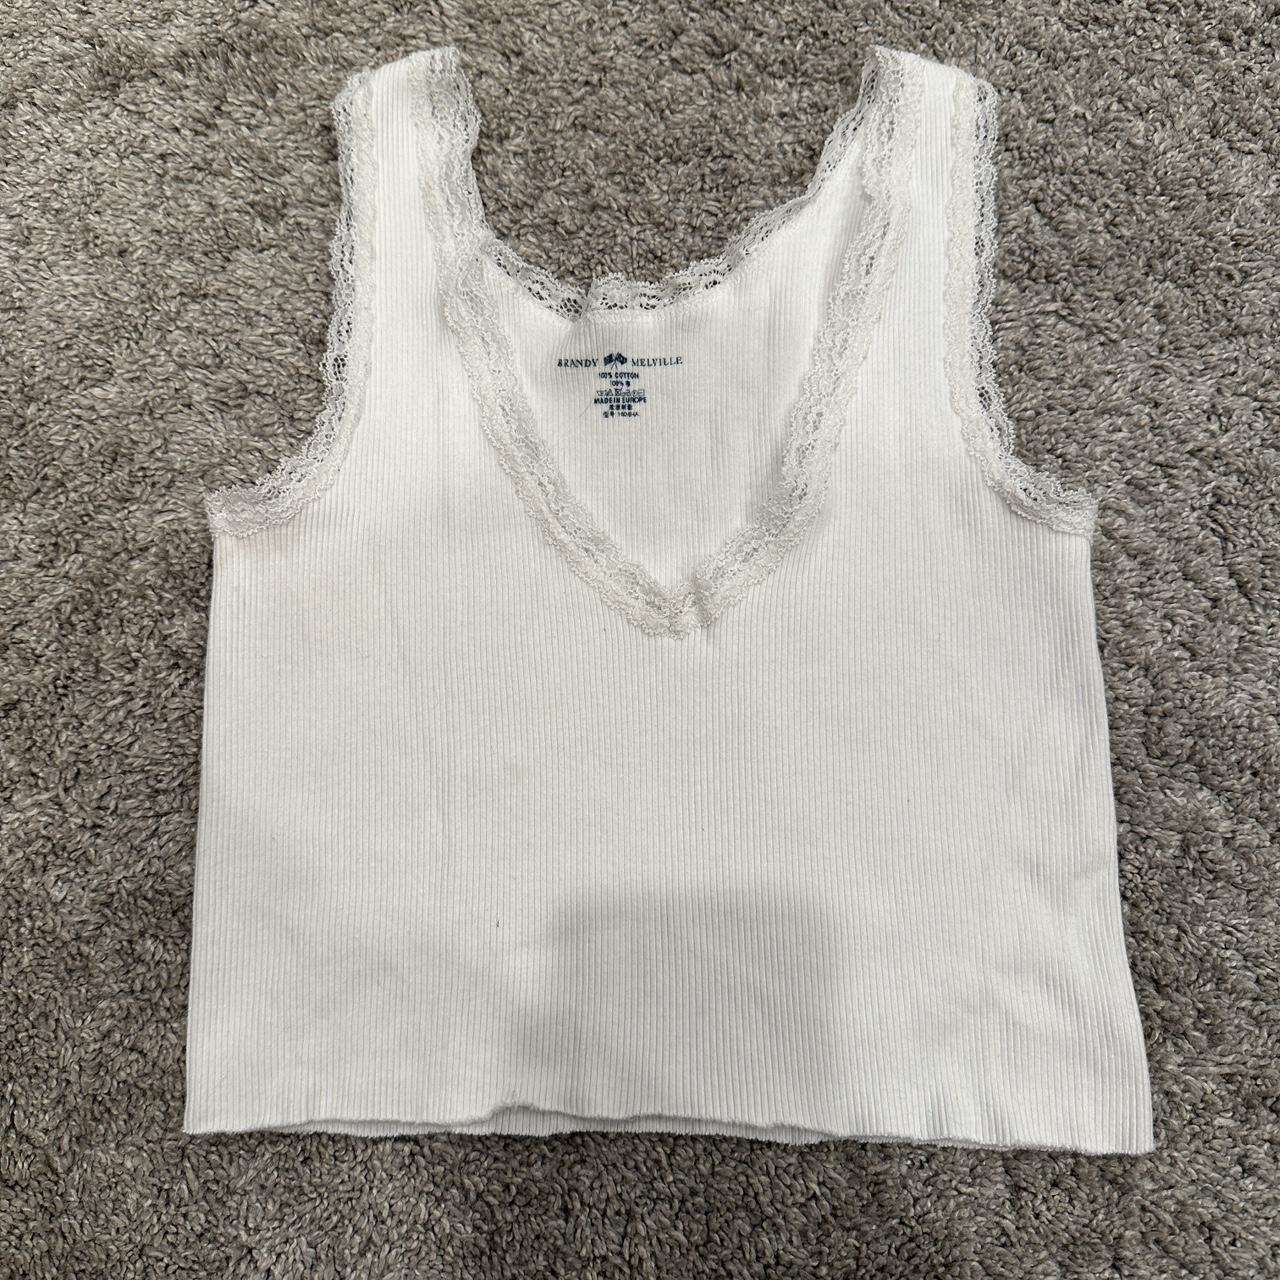 Brandy Melville white cropped scooped neck t-shirt lace trim one